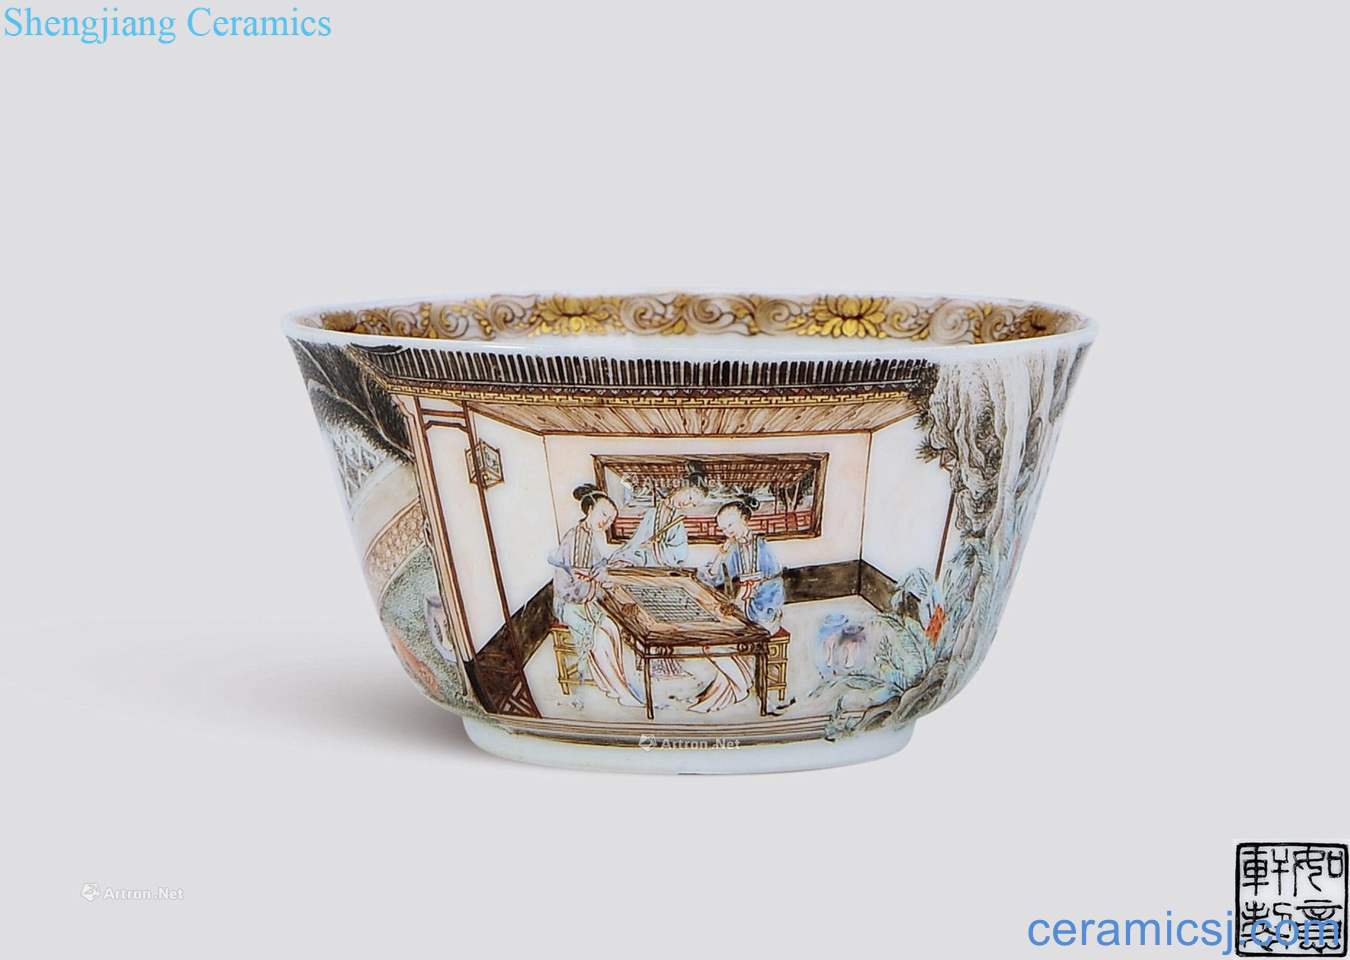 Qing dynasty in the 18th century the pavilions, coloured drawing or pattern had a small cup